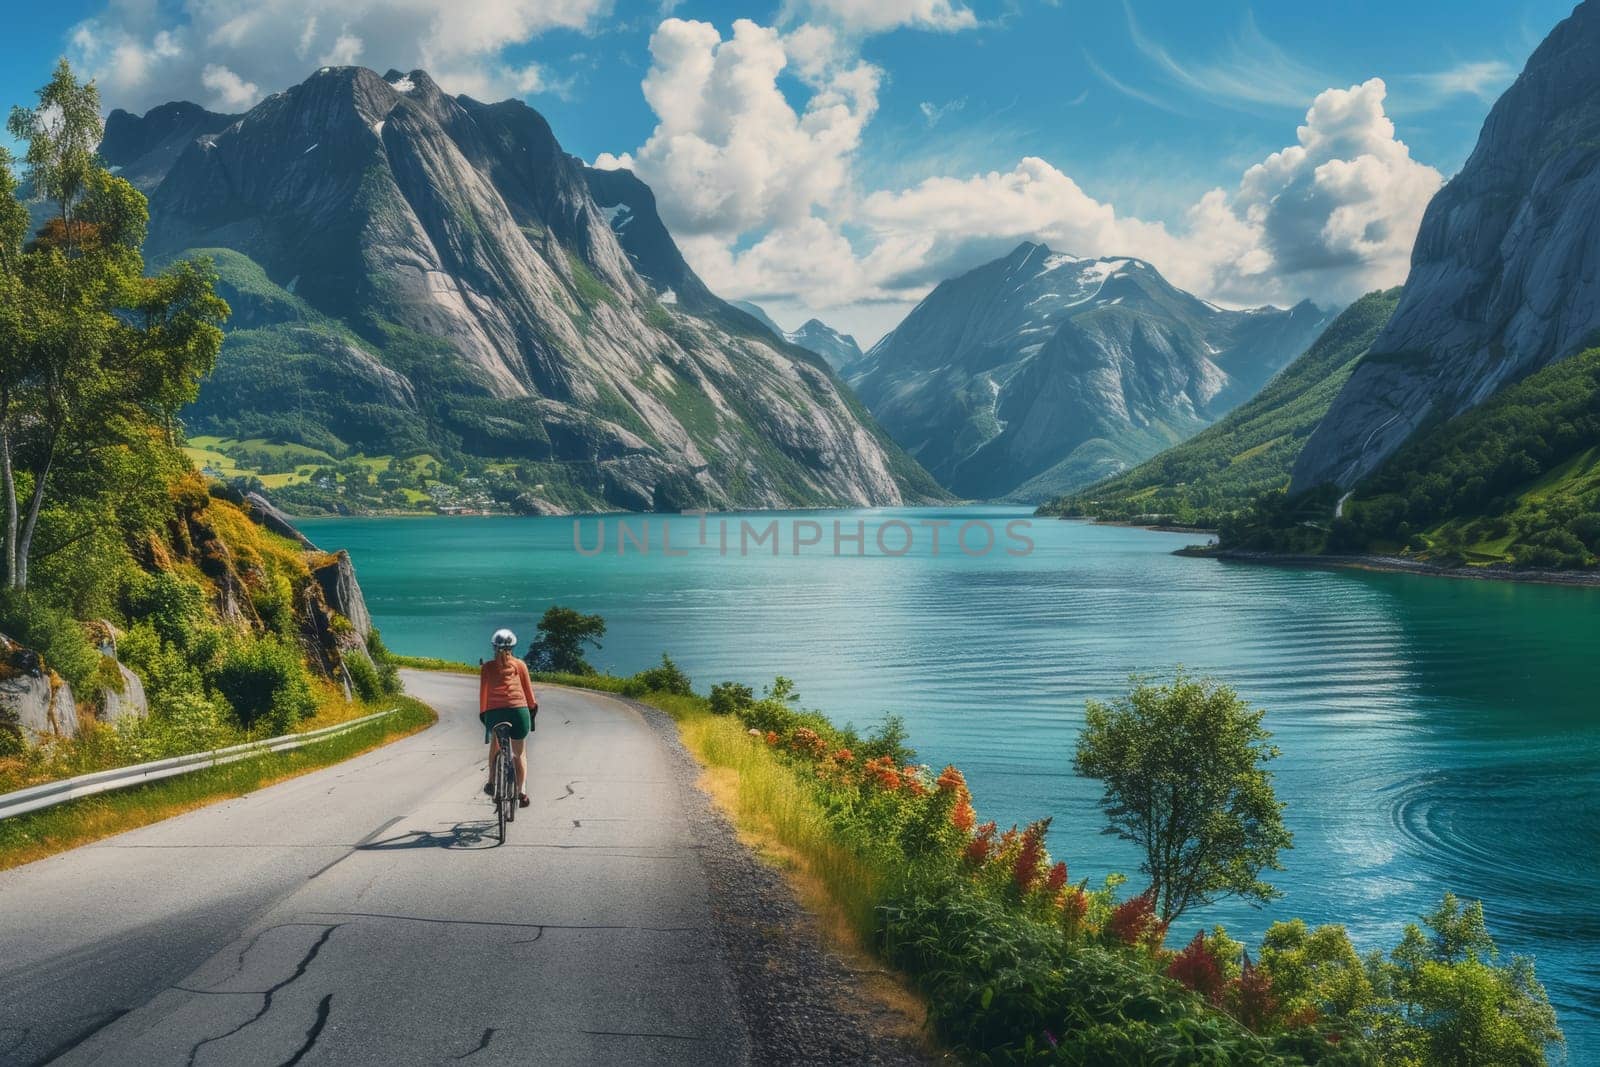 Cyclist riding on a picturesque road alongside a mountainous lake under a clear blue sky